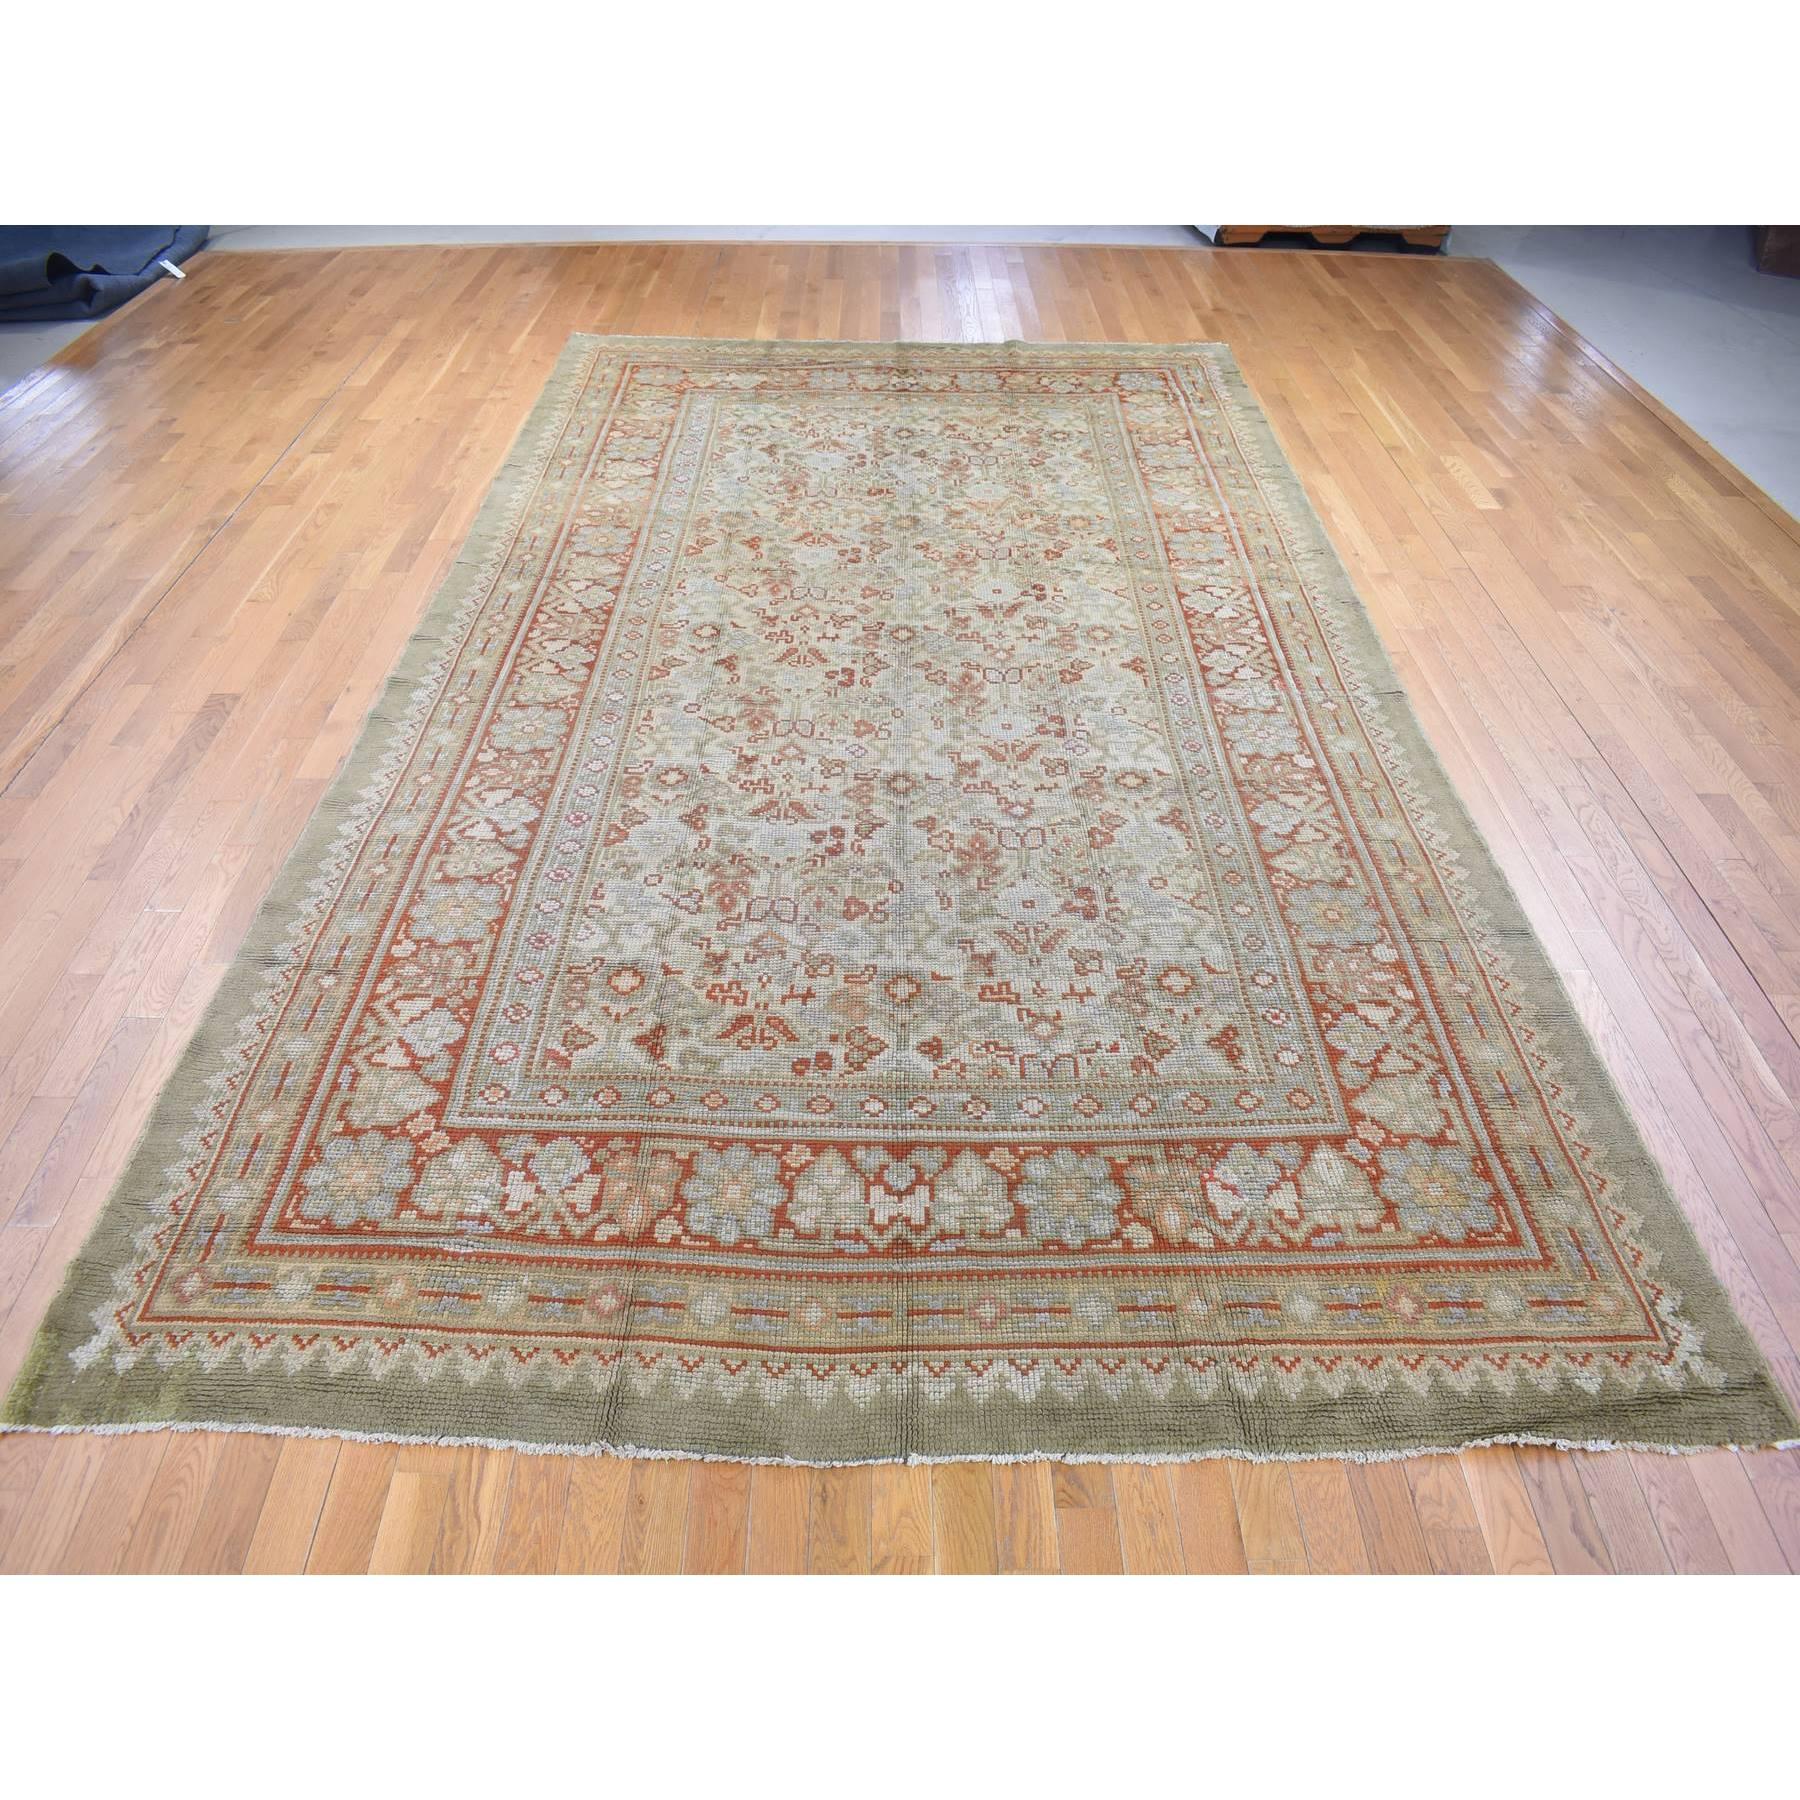 This fabulous hand-knotted carpet has been created and designed for extra strength and durability. This rug has been handcrafted for weeks in the traditional method that is used to make
Exact Rug Size in Feet and Inches : 8'7